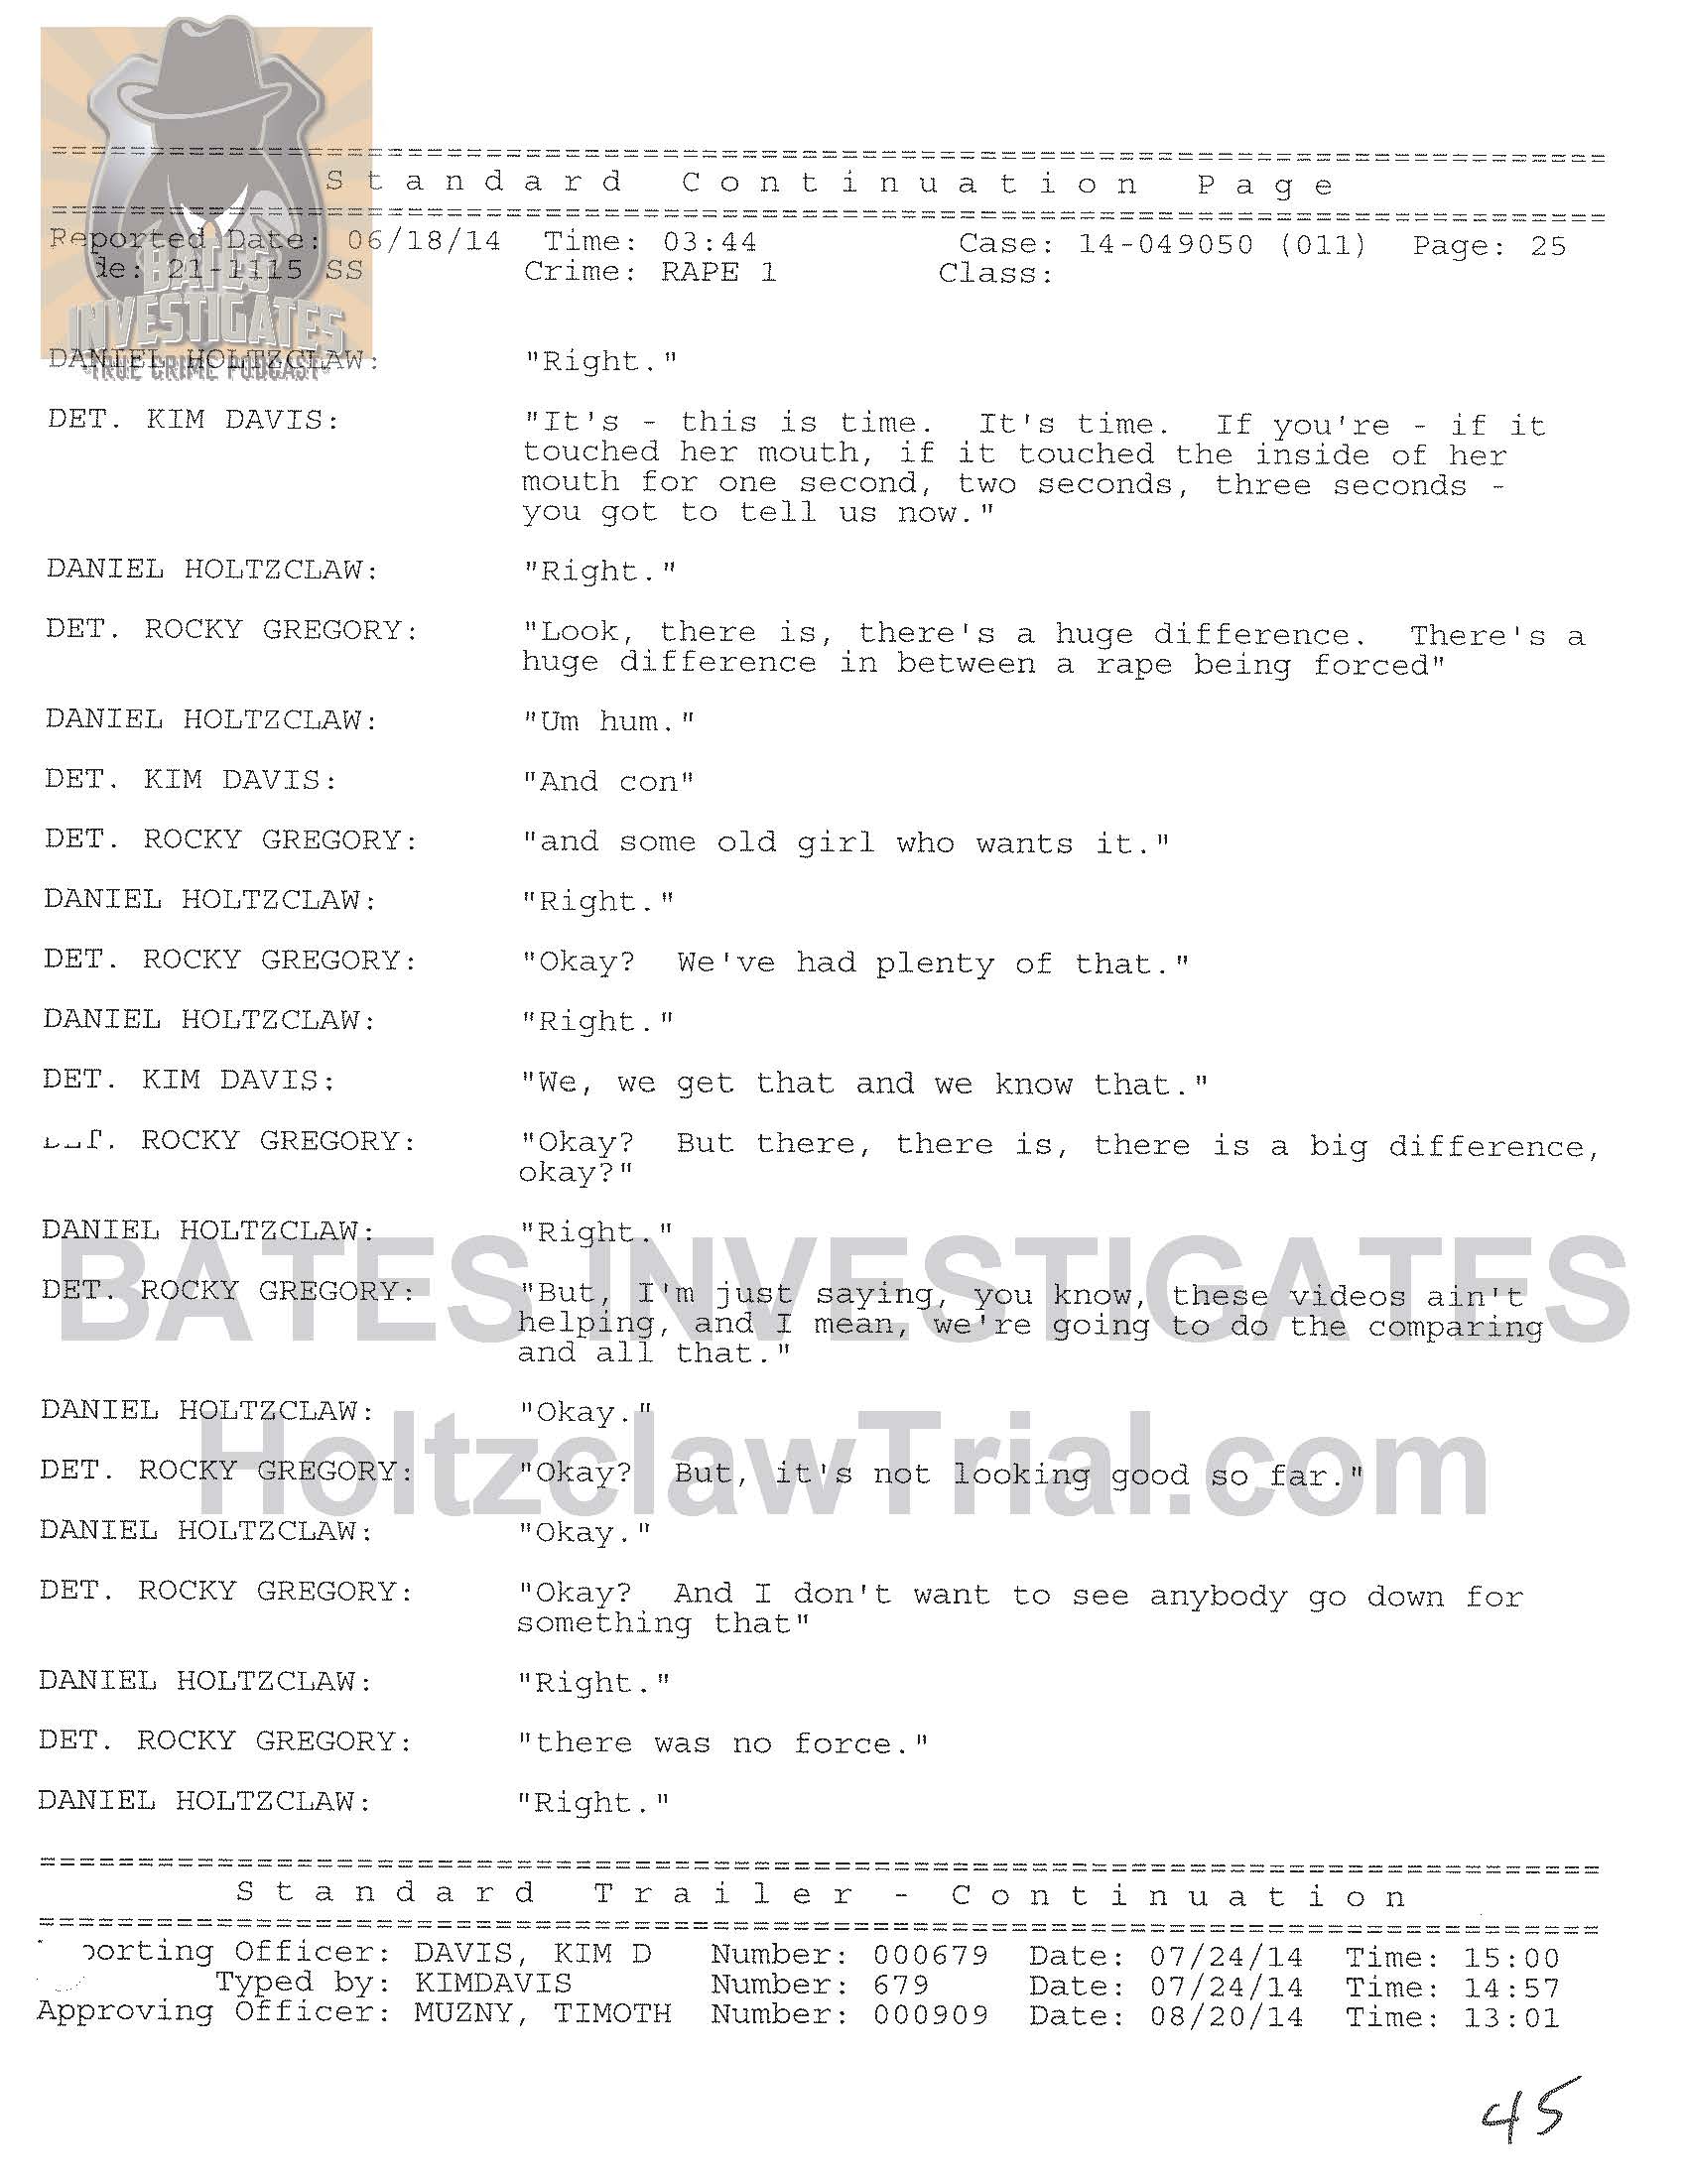 Holtzclaw Interrogation Transcript - Ep02 Redacted_Page_25.jpg